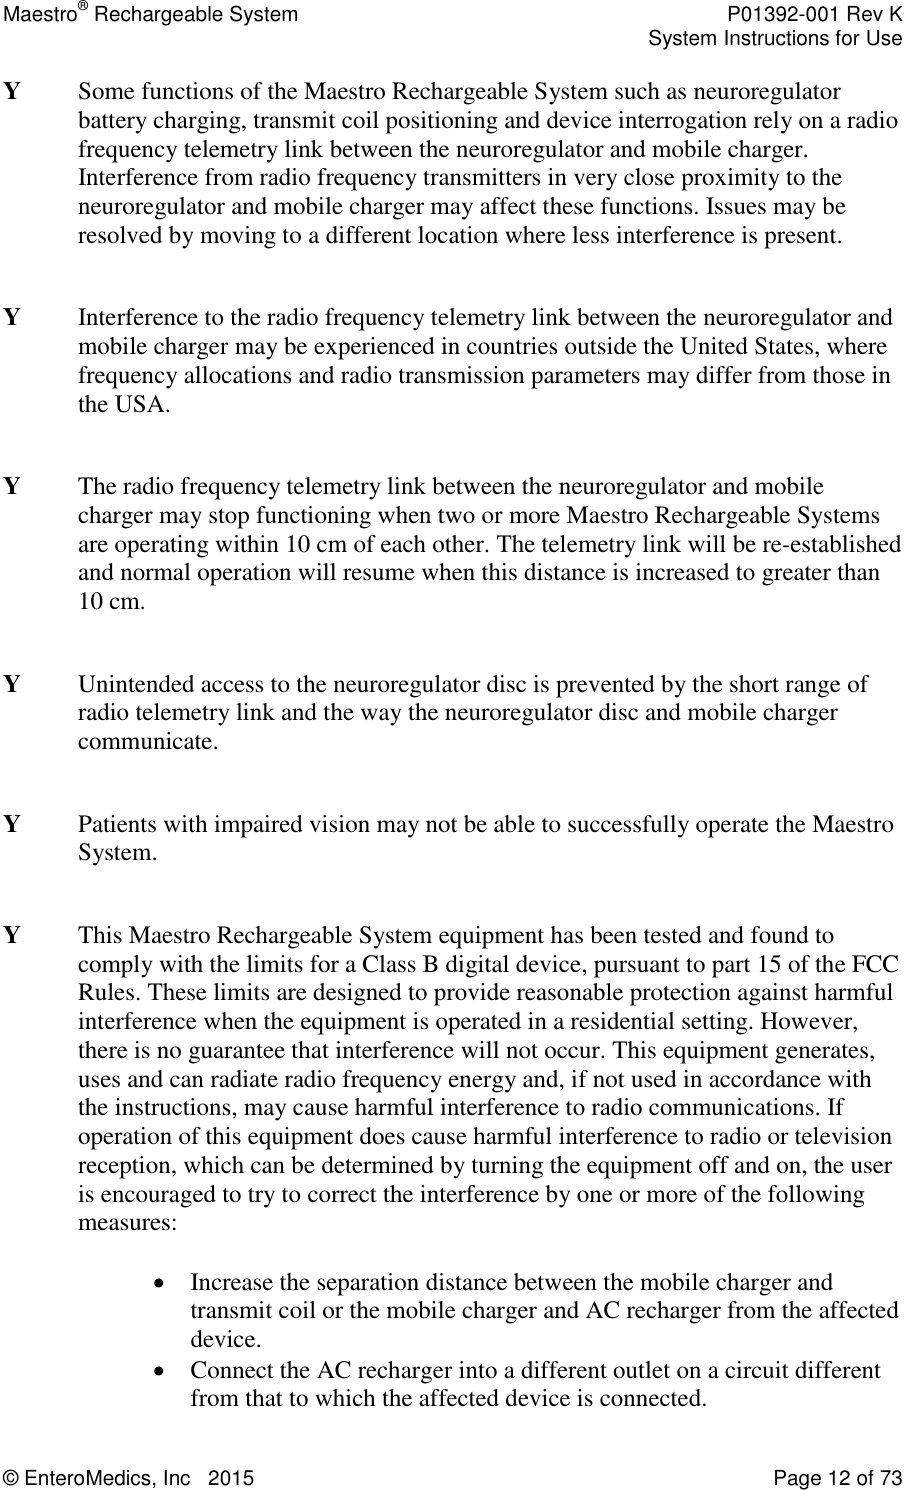 Maestro® Rechargeable System    P01392-001 Rev K     System Instructions for Use  © EnteroMedics, Inc   2015  Page 12 of 73  Y  Some functions of the Maestro Rechargeable System such as neuroregulator battery charging, transmit coil positioning and device interrogation rely on a radio frequency telemetry link between the neuroregulator and mobile charger. Interference from radio frequency transmitters in very close proximity to the neuroregulator and mobile charger may affect these functions. Issues may be resolved by moving to a different location where less interference is present.  Y   Interference to the radio frequency telemetry link between the neuroregulator and mobile charger may be experienced in countries outside the United States, where frequency allocations and radio transmission parameters may differ from those in the USA.    Y   The radio frequency telemetry link between the neuroregulator and mobile charger may stop functioning when two or more Maestro Rechargeable Systems are operating within 10 cm of each other. The telemetry link will be re-established and normal operation will resume when this distance is increased to greater than 10 cm.   Y   Unintended access to the neuroregulator disc is prevented by the short range of radio telemetry link and the way the neuroregulator disc and mobile charger communicate.  Y   Patients with impaired vision may not be able to successfully operate the Maestro System.  Y   This Maestro Rechargeable System equipment has been tested and found to comply with the limits for a Class B digital device, pursuant to part 15 of the FCC Rules. These limits are designed to provide reasonable protection against harmful interference when the equipment is operated in a residential setting. However, there is no guarantee that interference will not occur. This equipment generates, uses and can radiate radio frequency energy and, if not used in accordance with the instructions, may cause harmful interference to radio communications. If operation of this equipment does cause harmful interference to radio or television reception, which can be determined by turning the equipment off and on, the user is encouraged to try to correct the interference by one or more of the following measures:   Increase the separation distance between the mobile charger and transmit coil or the mobile charger and AC recharger from the affected device.  Connect the AC recharger into a different outlet on a circuit different from that to which the affected device is connected. 